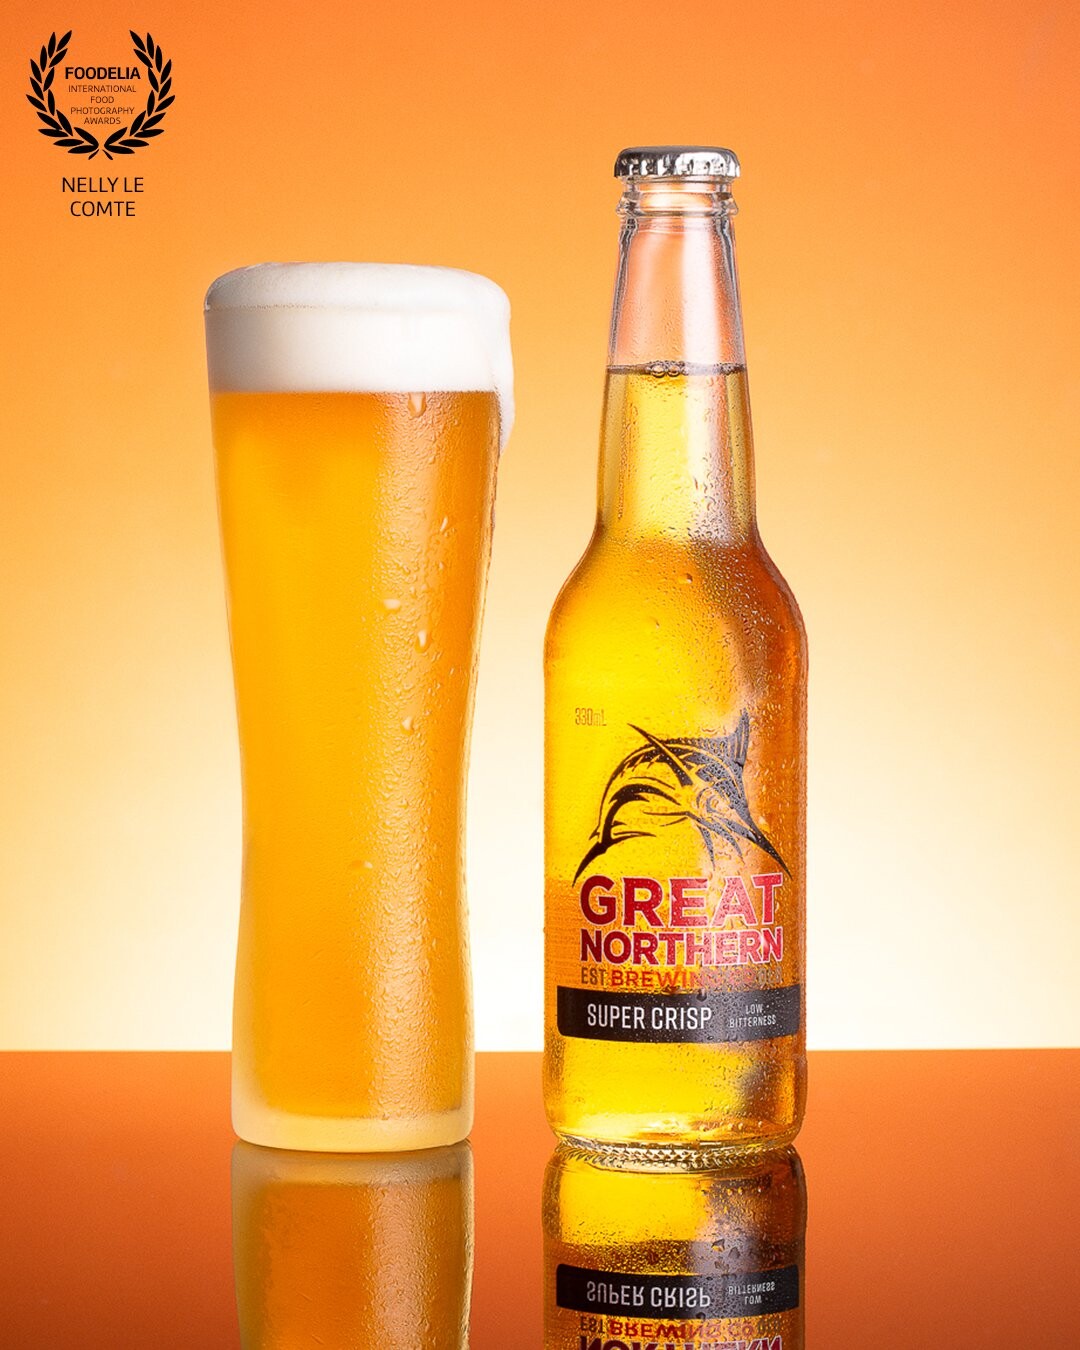 Studio photography test shot the day before a full day food and beer photo shoot with chef and stylist. I wanted to get the colour of the beer right and happened to have a bottle of Great Northern, a local beer in the fridge. Then enhanced the golden beer tones with the orange backlight.